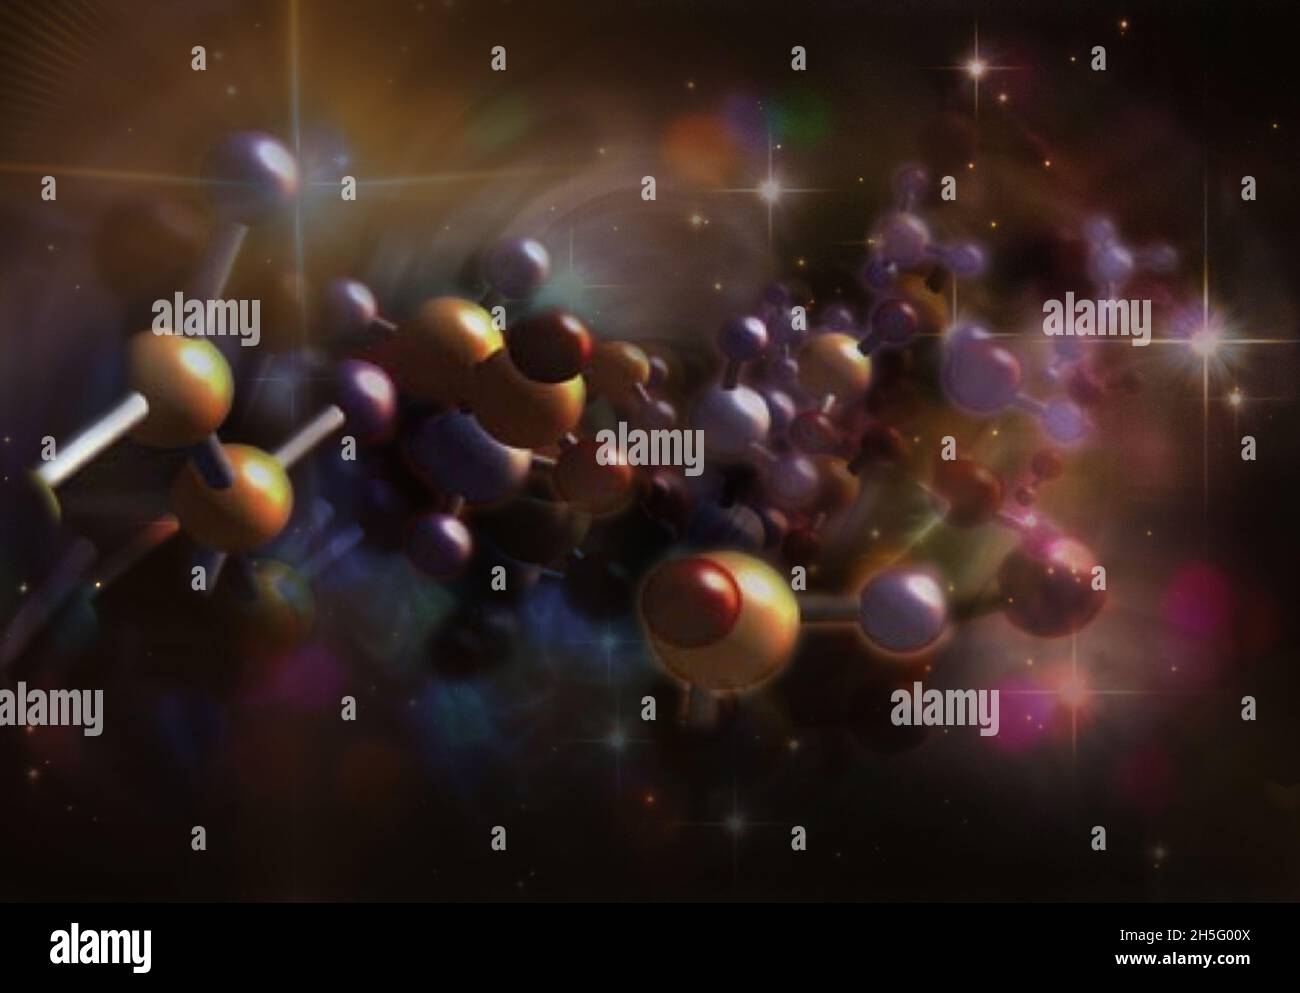 Molecules in space. Theory of the origin of life. Elements of this image furnished by NASA. Stock Photo